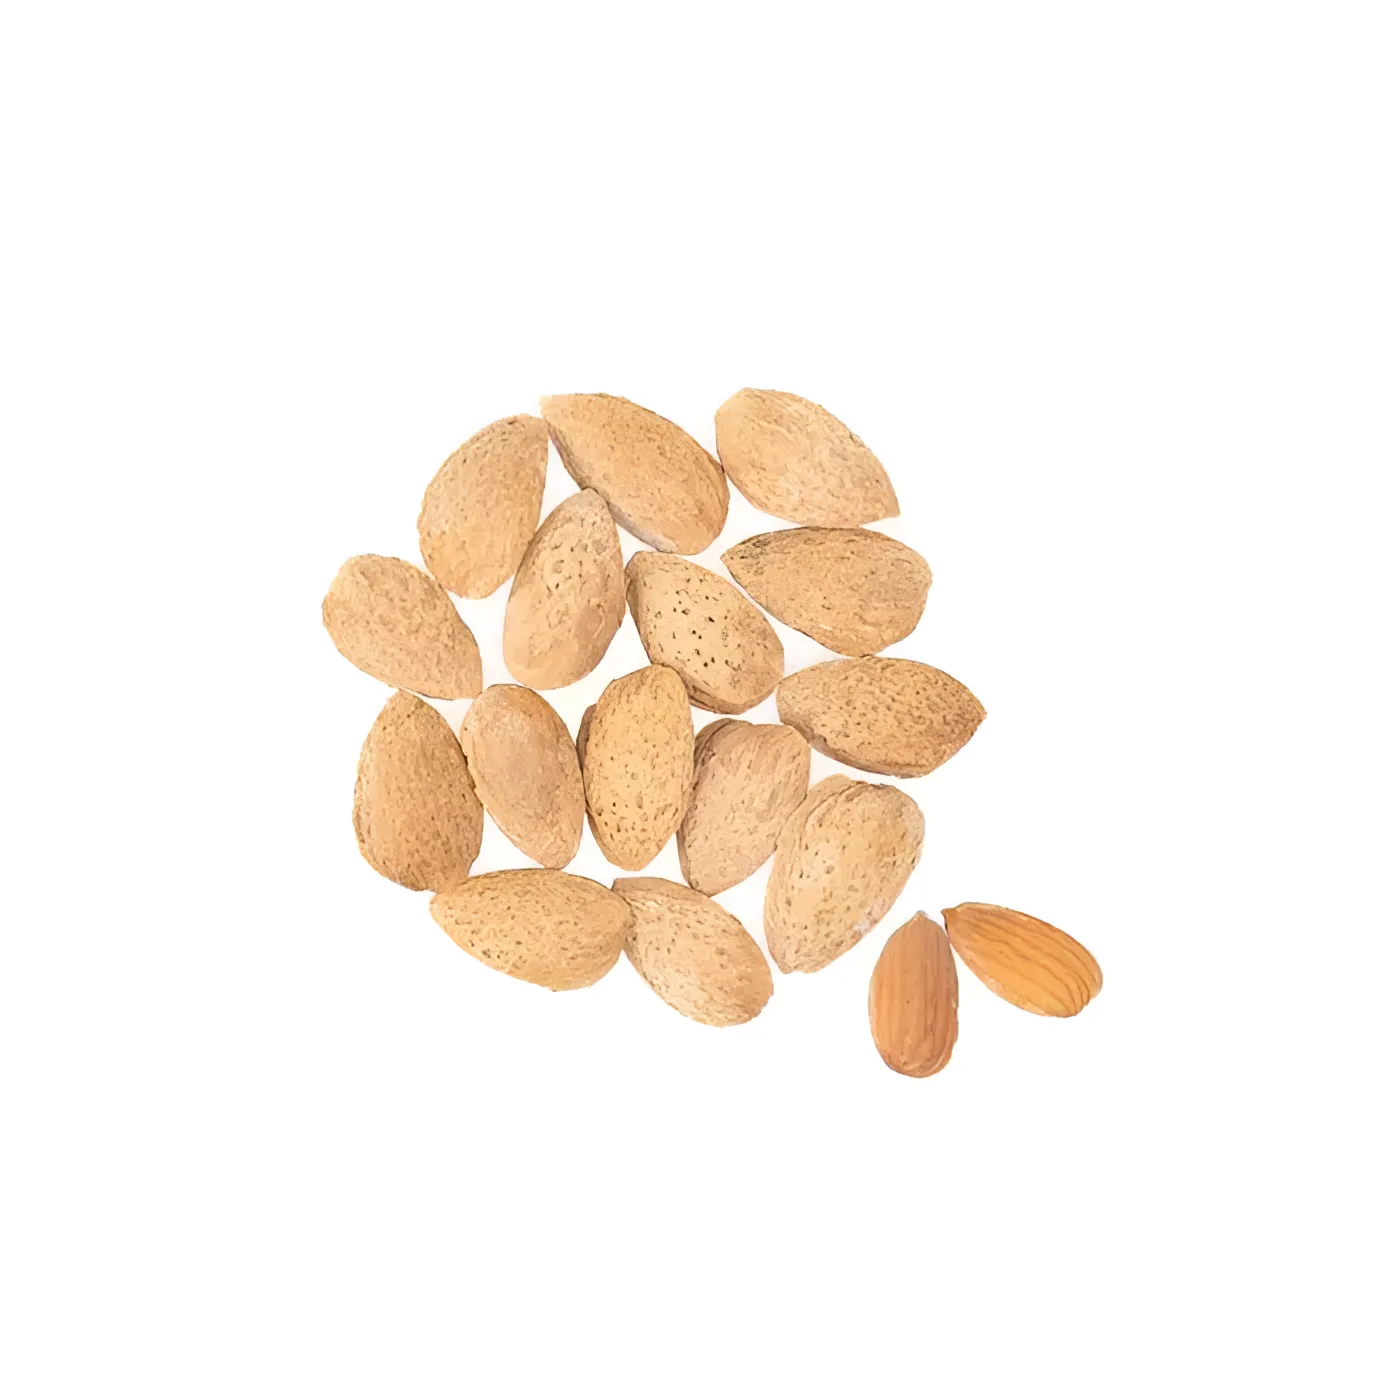 ALMONDS IN SHELL SALTED